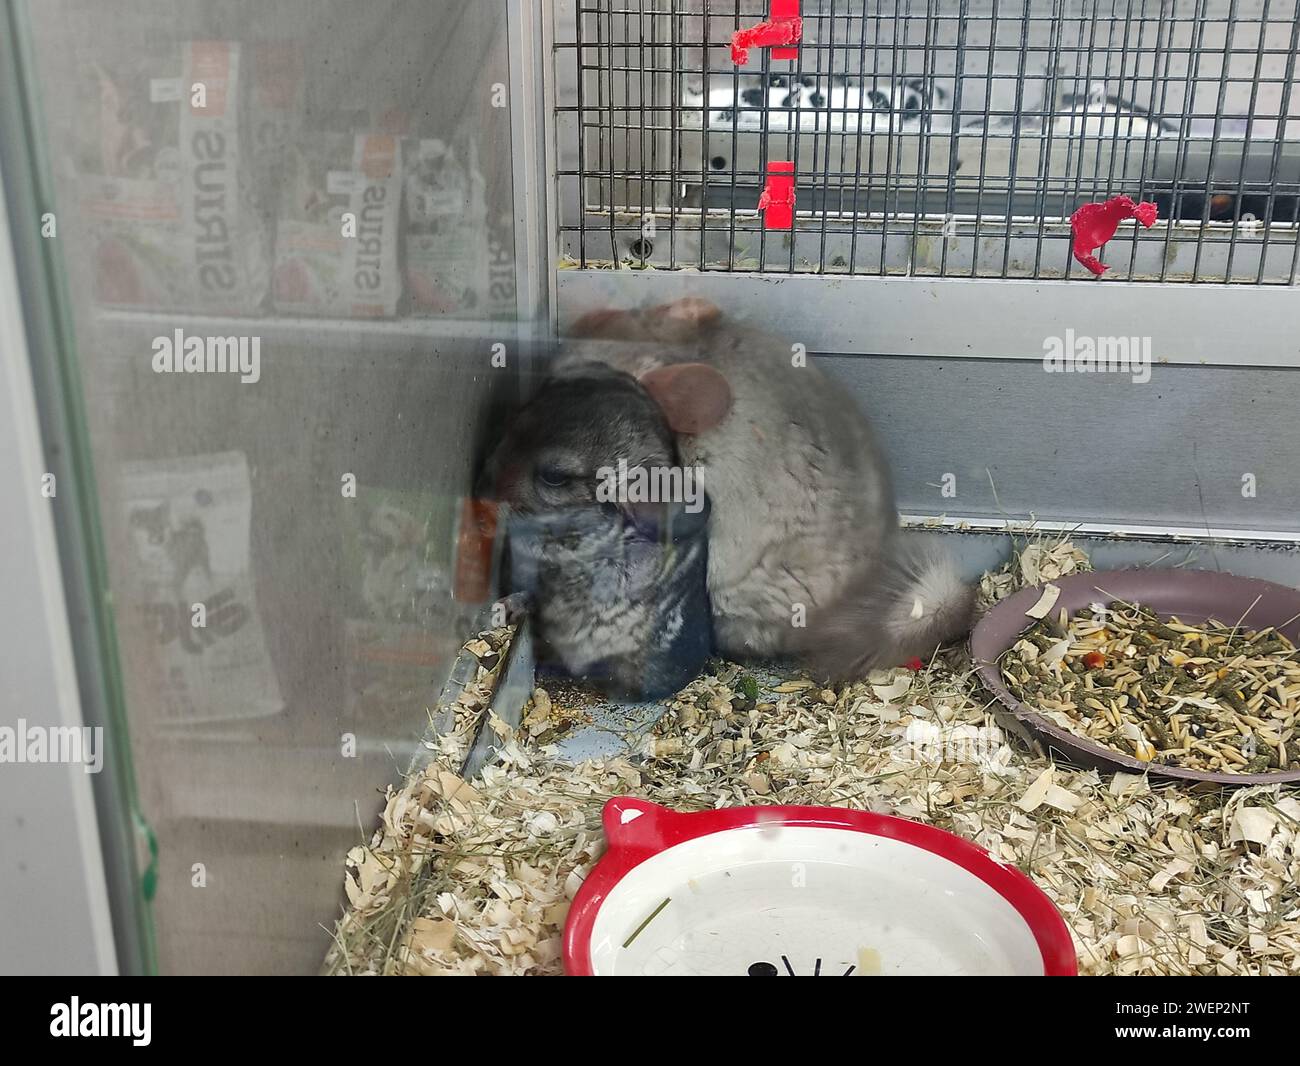 Chinchillas sleep in the corner of the cage Stock Photo